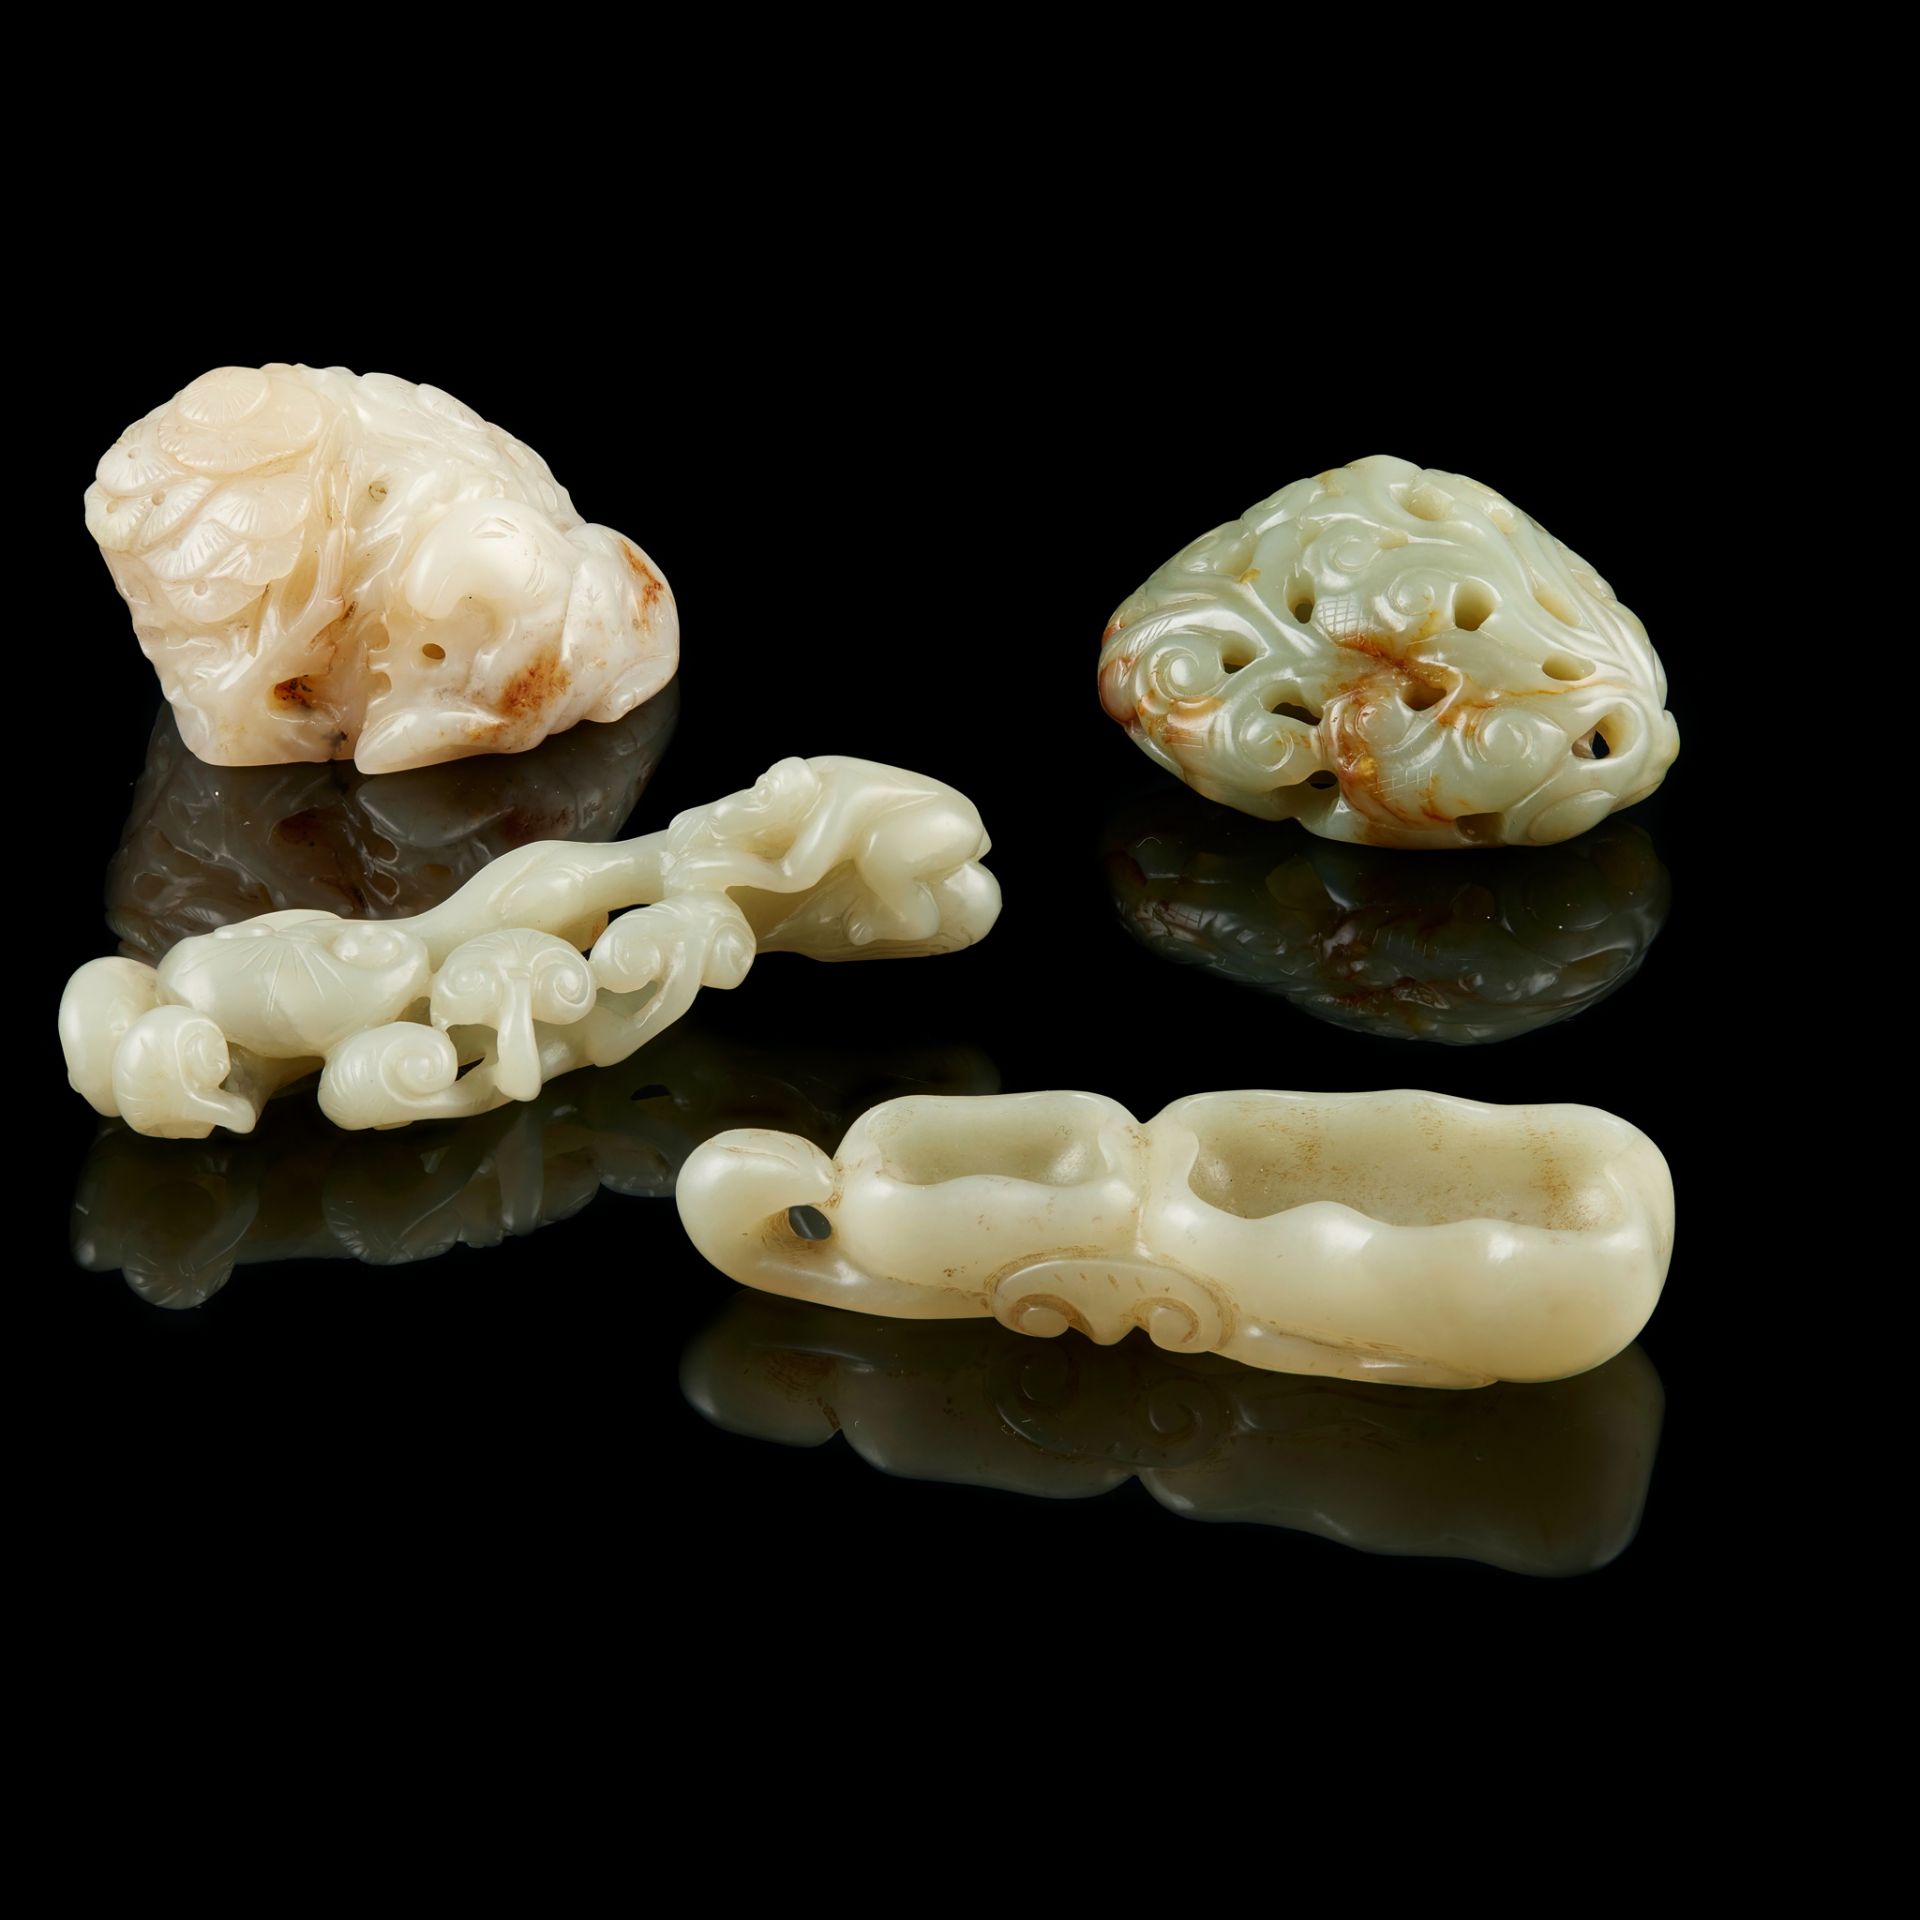 GROUP OF FOUR JADE CARVINGS 19TH-20TH CENTURY